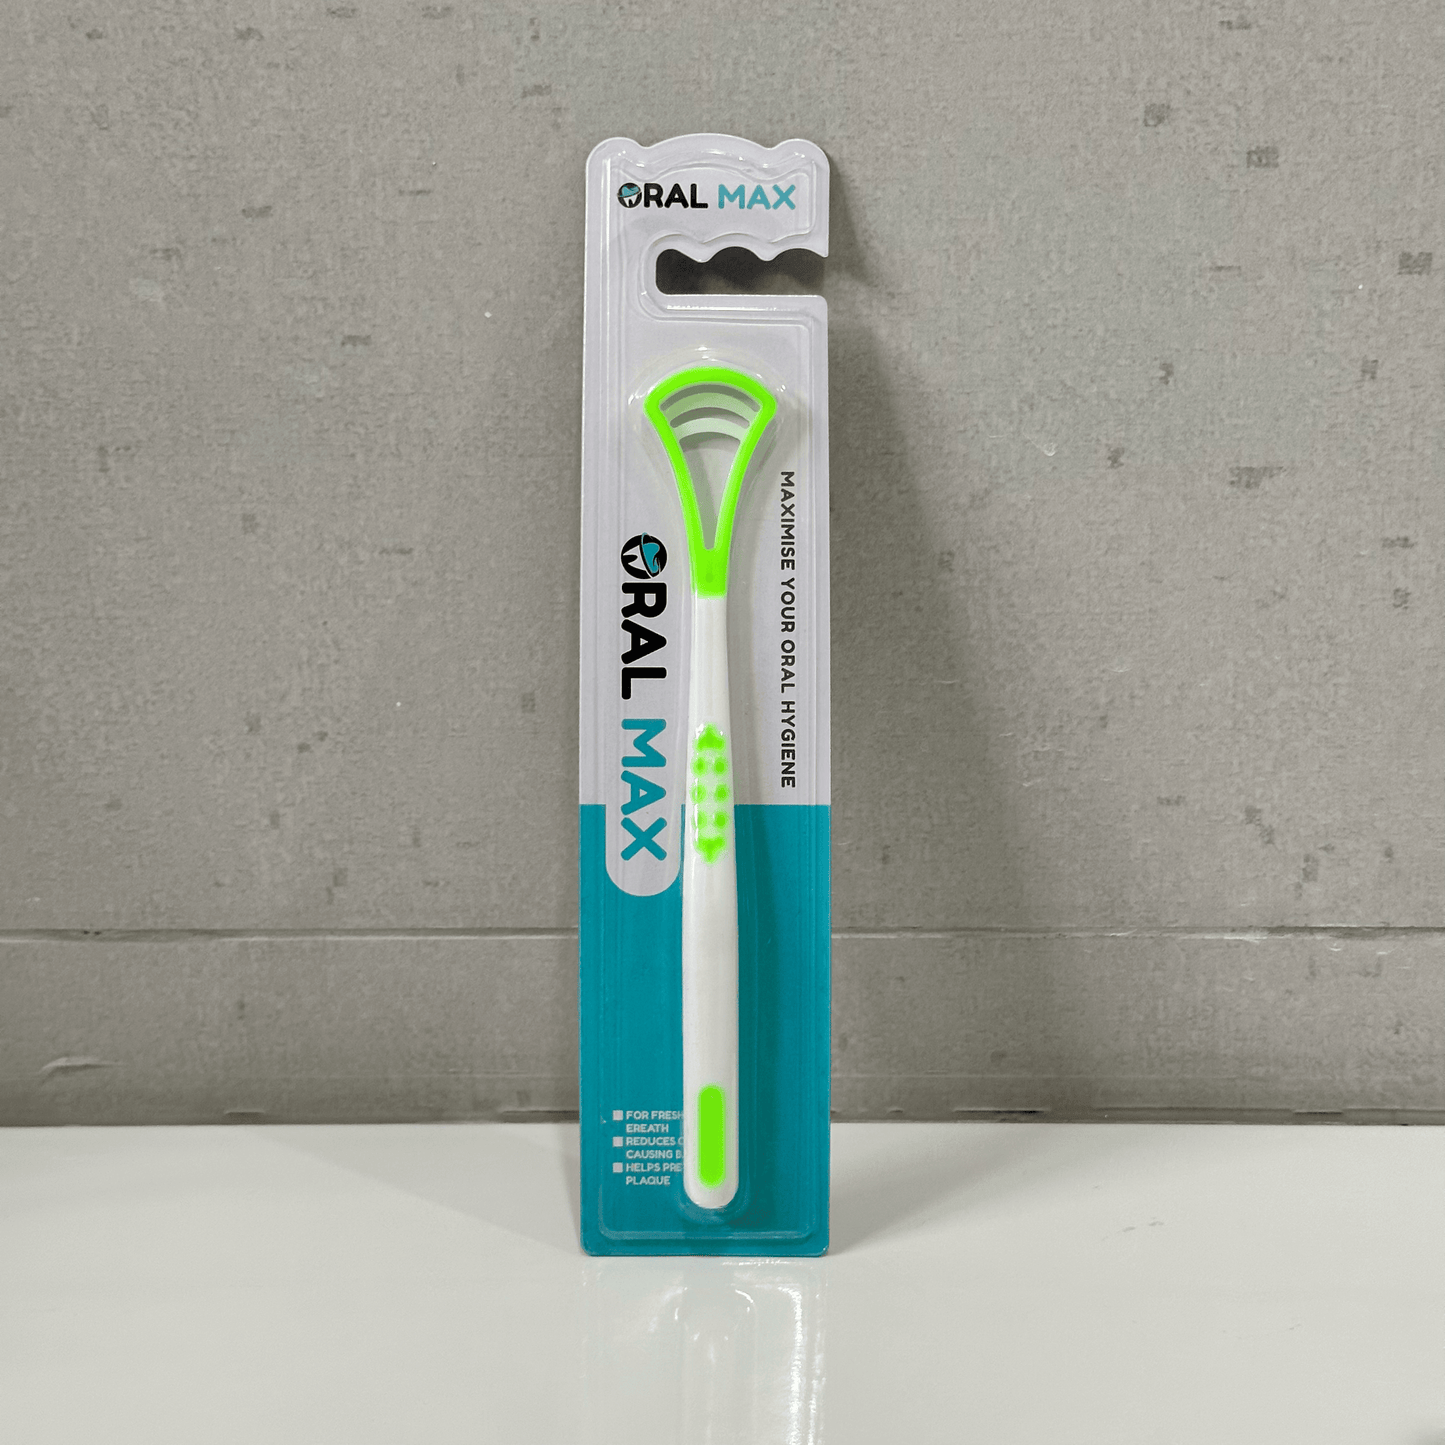 ORAL MAX - Tongue Cleaner